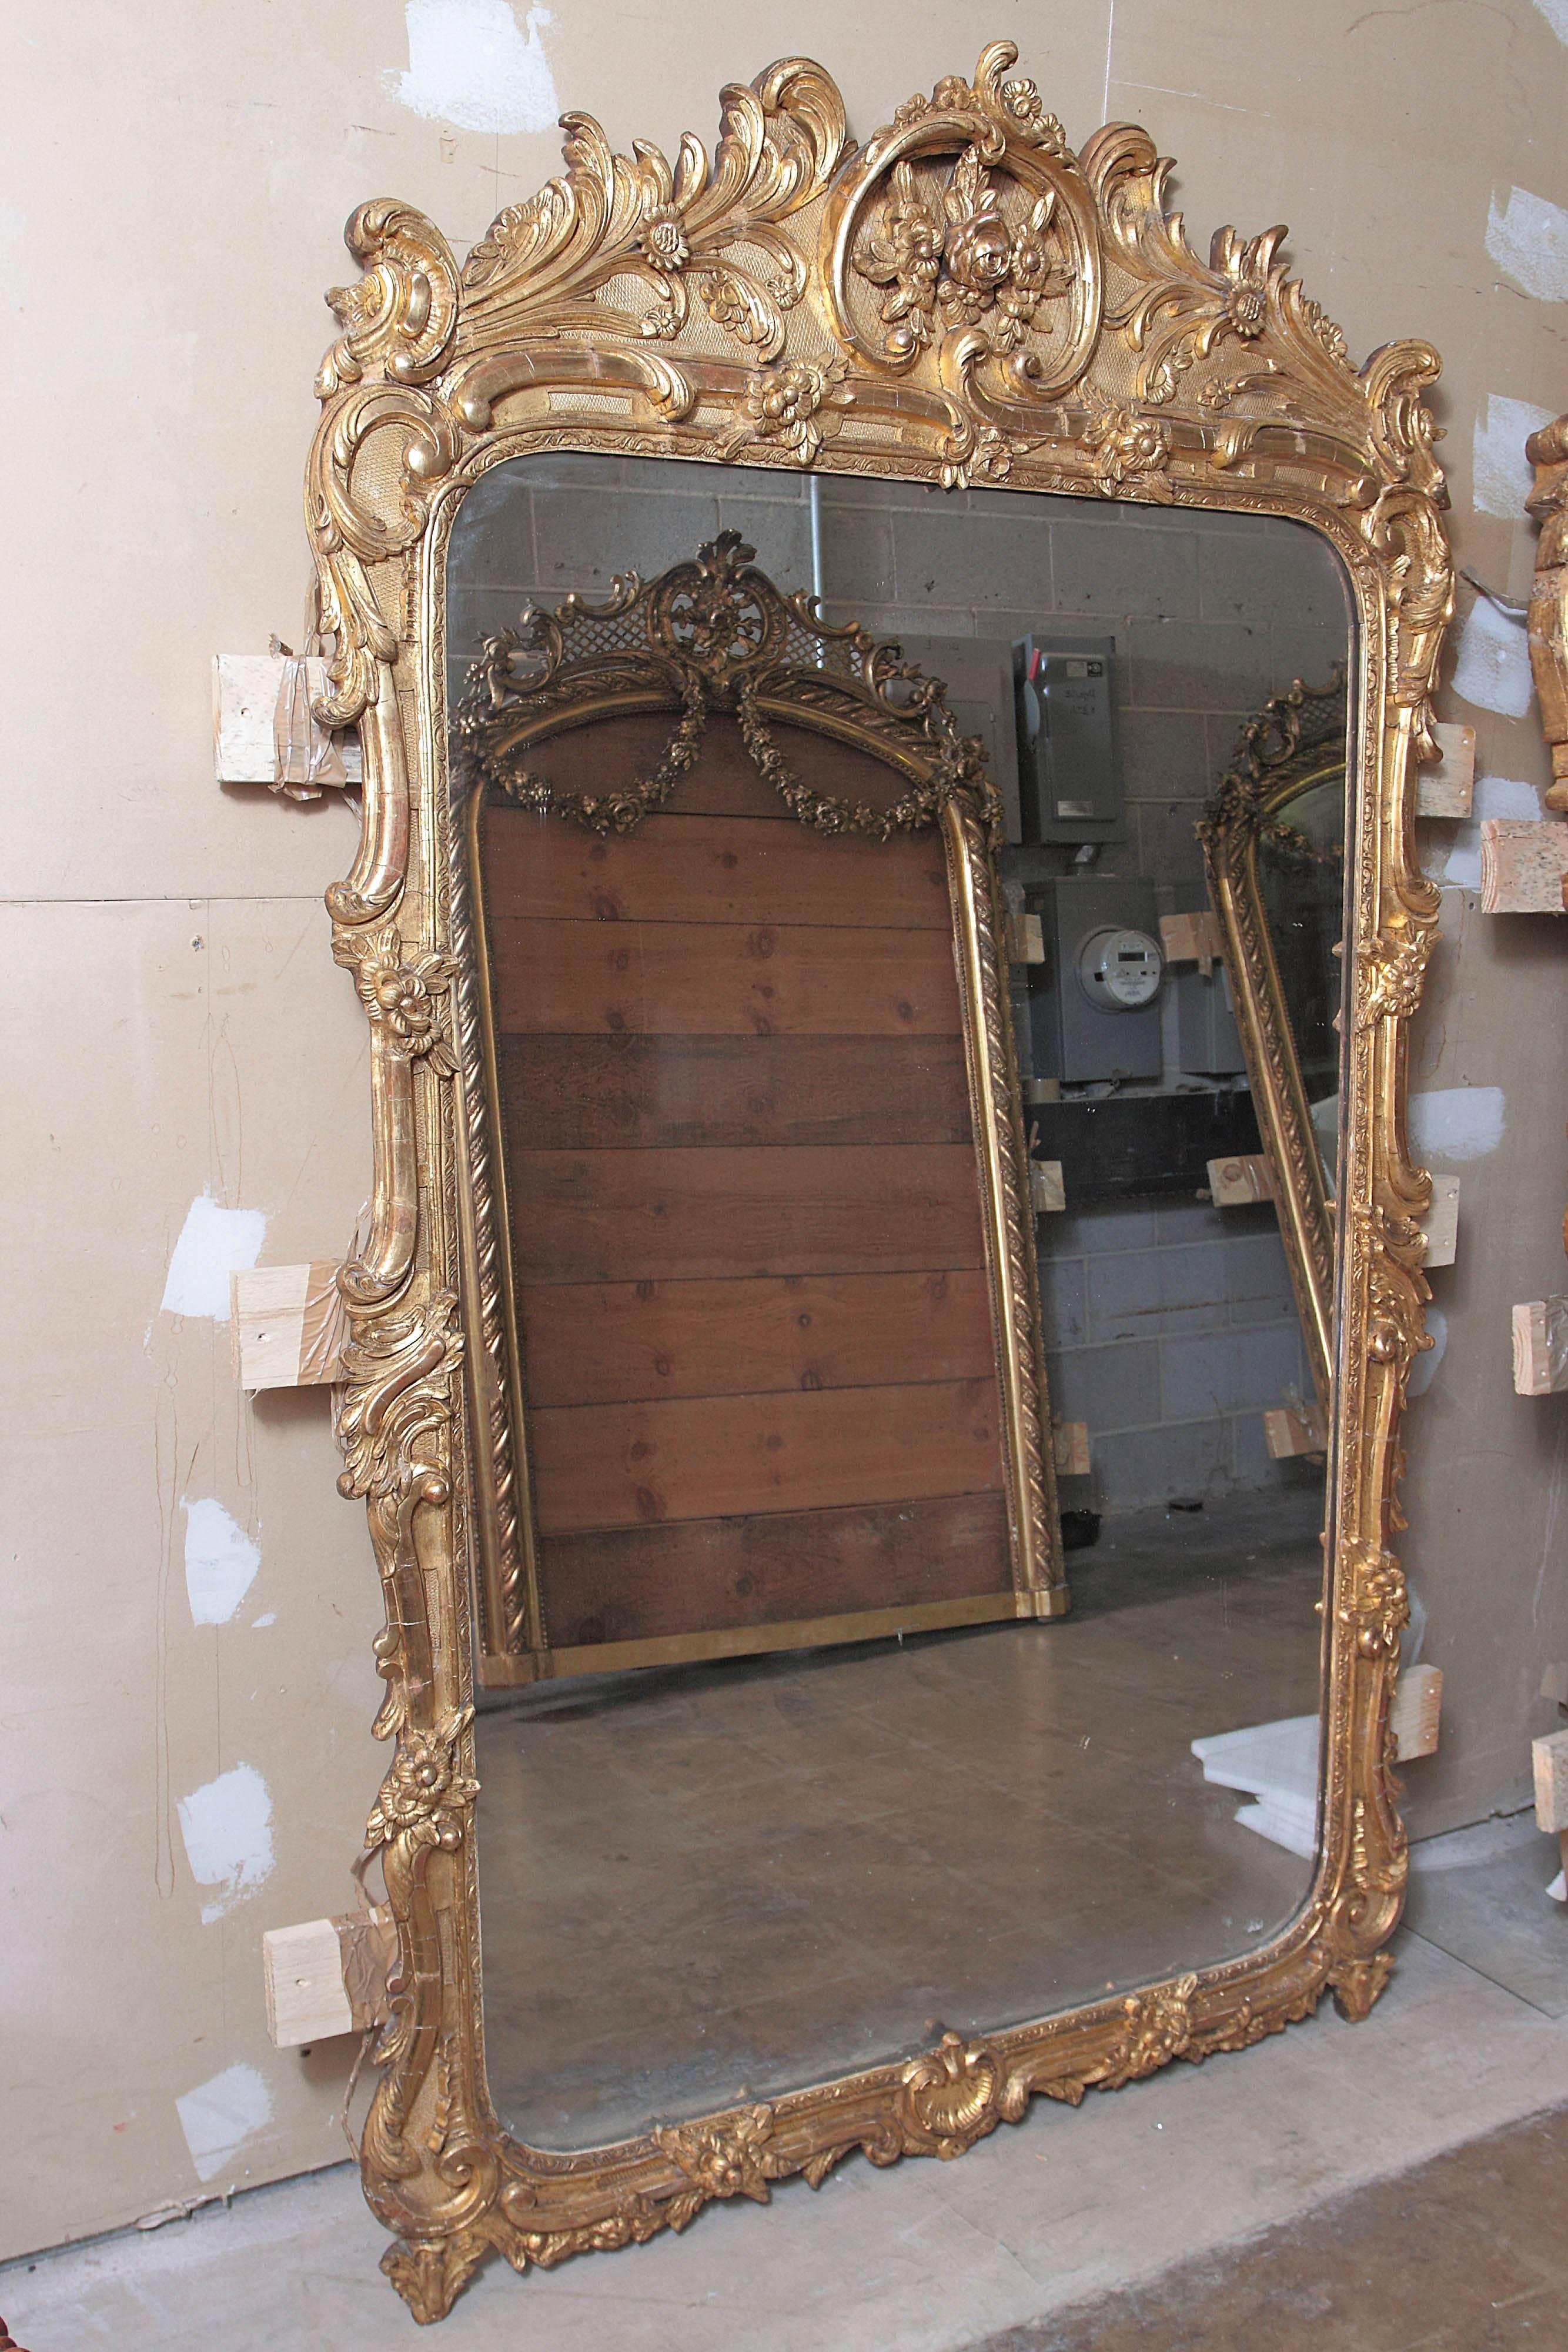 Pair of finely carved and gilt 19th century palatial French Regence mirrors.